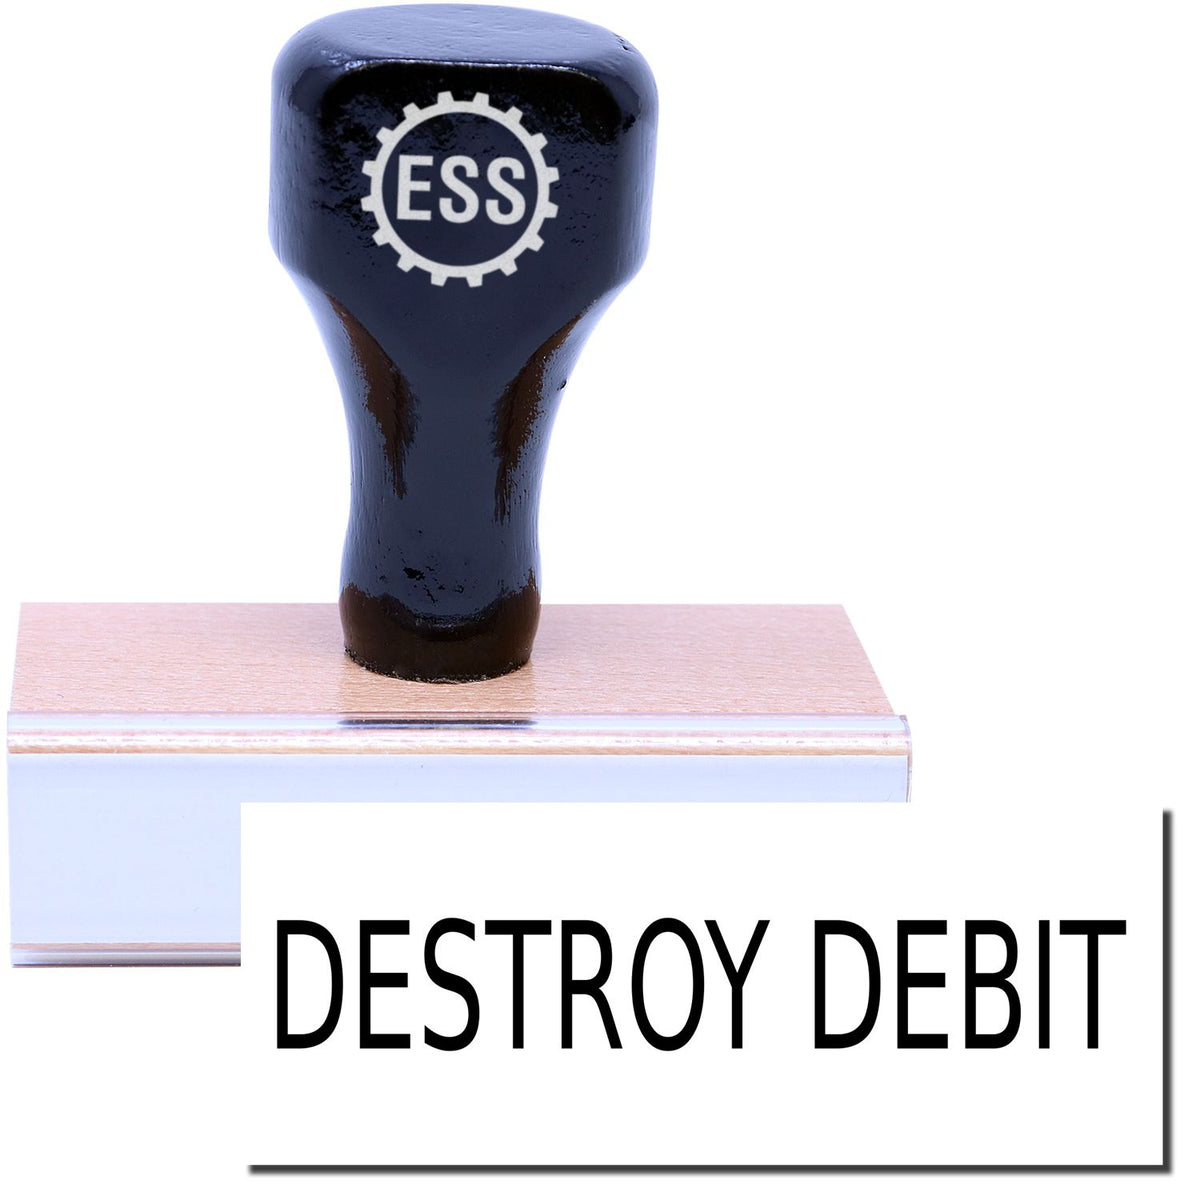 A stock office rubber stamp with a stamped image showing how the text &quot;DESTROY DEBIT&quot; is displayed after stamping.